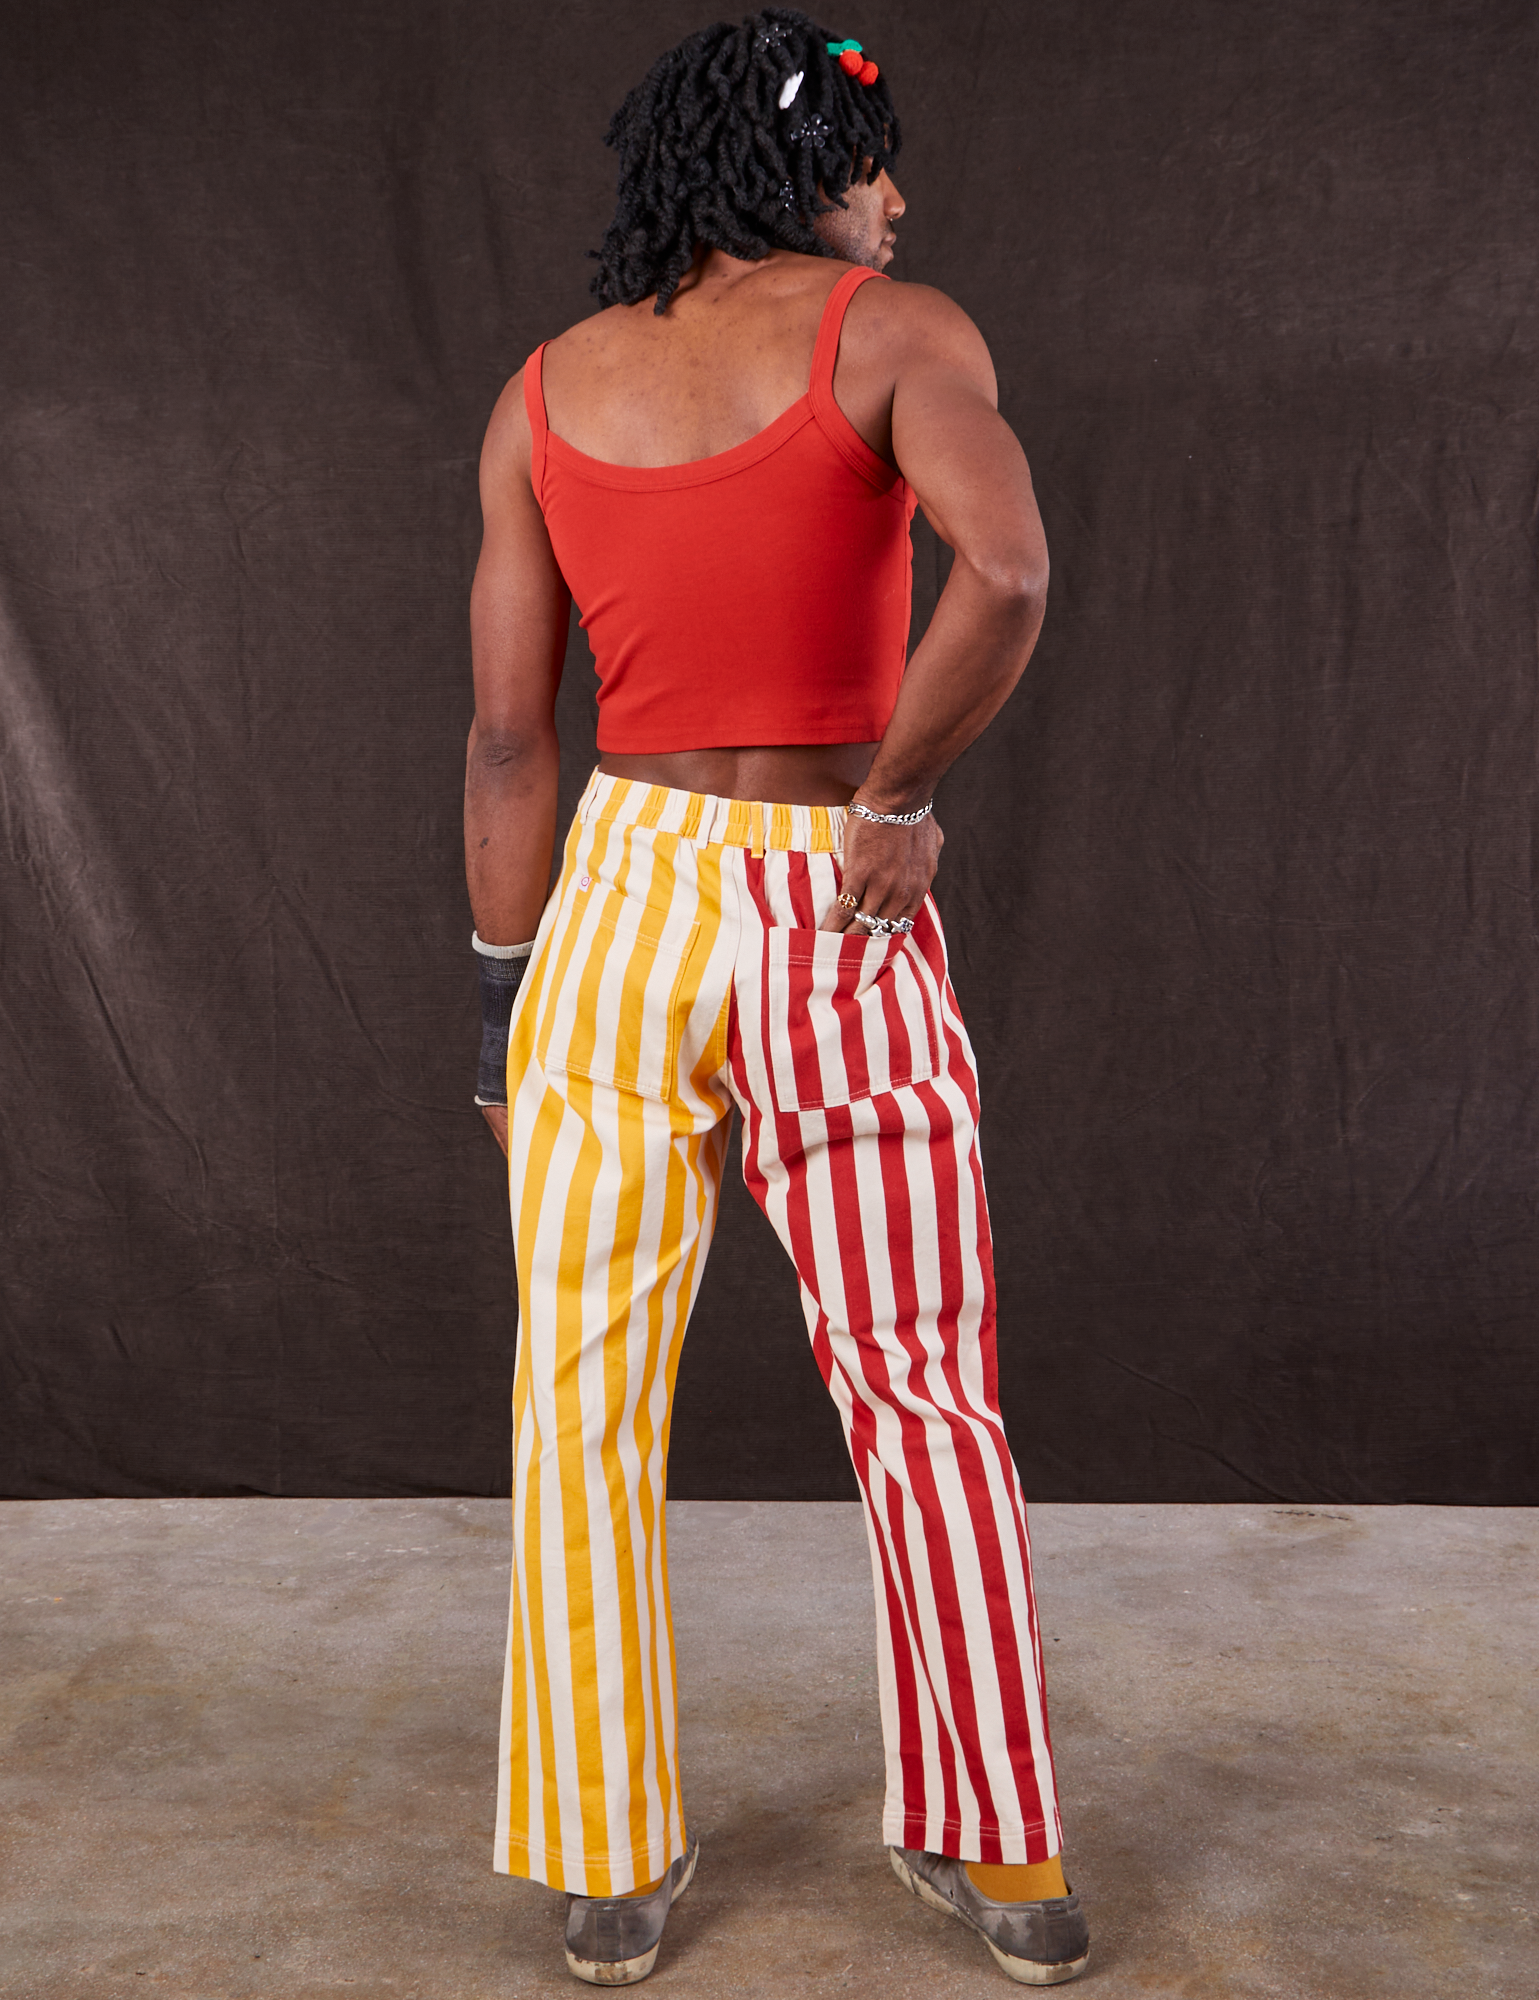 Back view of Western Pants in Ketchup/Mustard Stripes and mustang red Cami on Jerrod